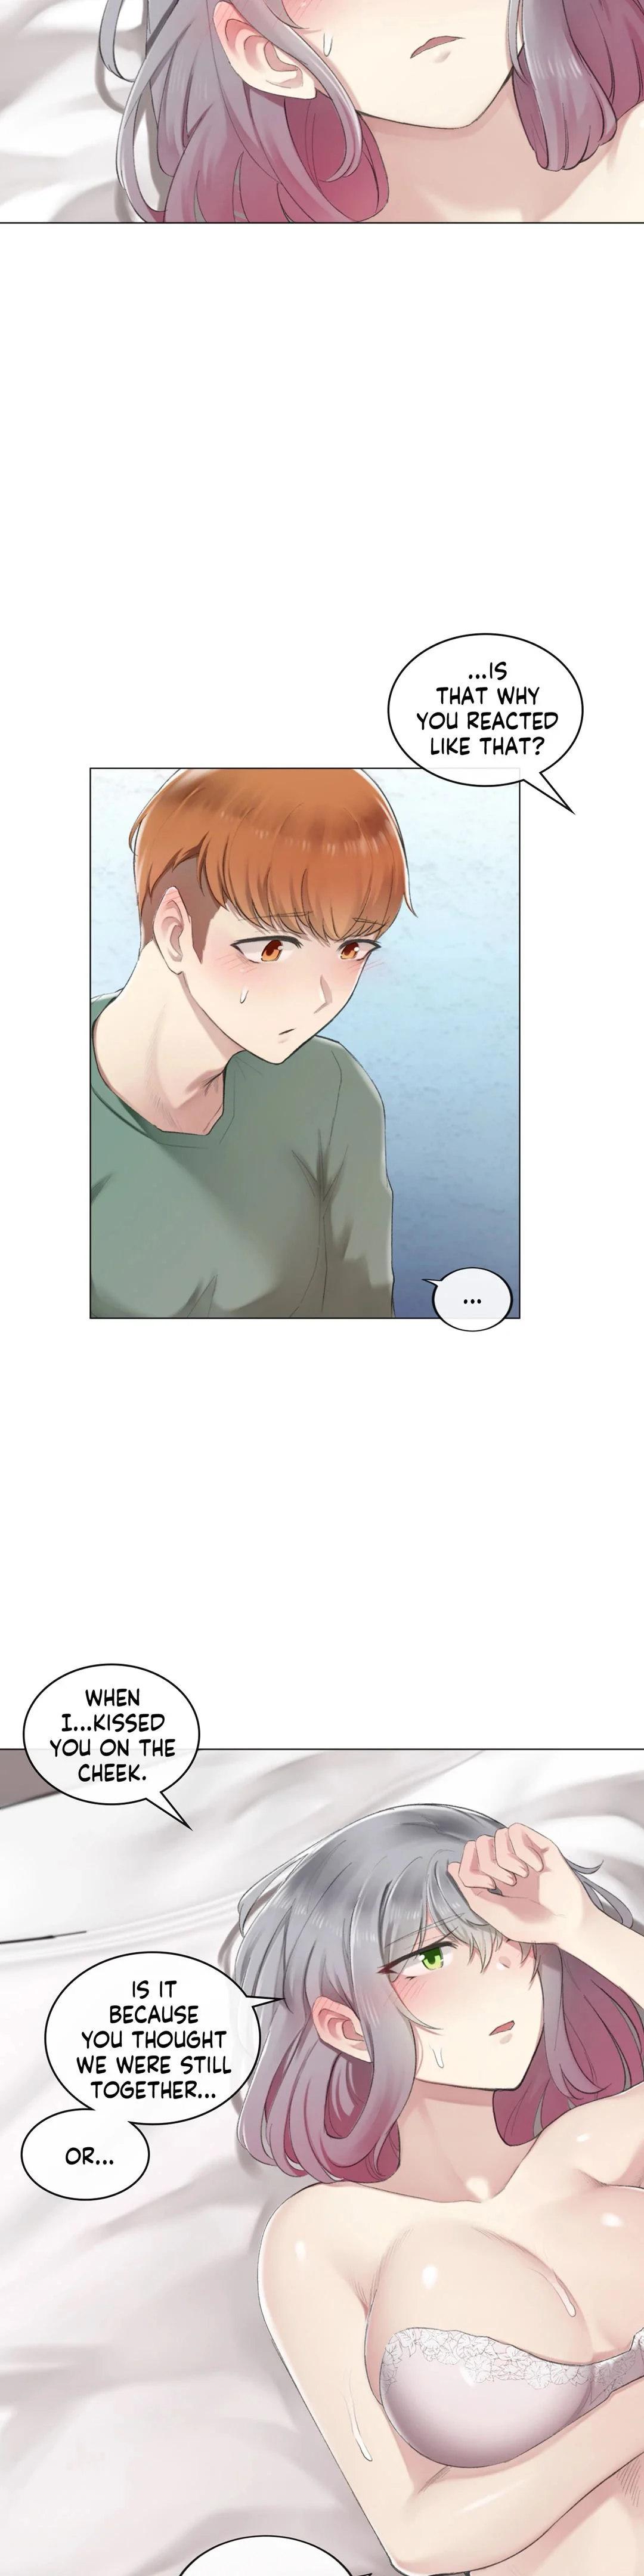 [Dumangoon, KONG_] Sexcape Room: Snap Off Ch.7/7 [English] [Manhwa PDF] Completed 94